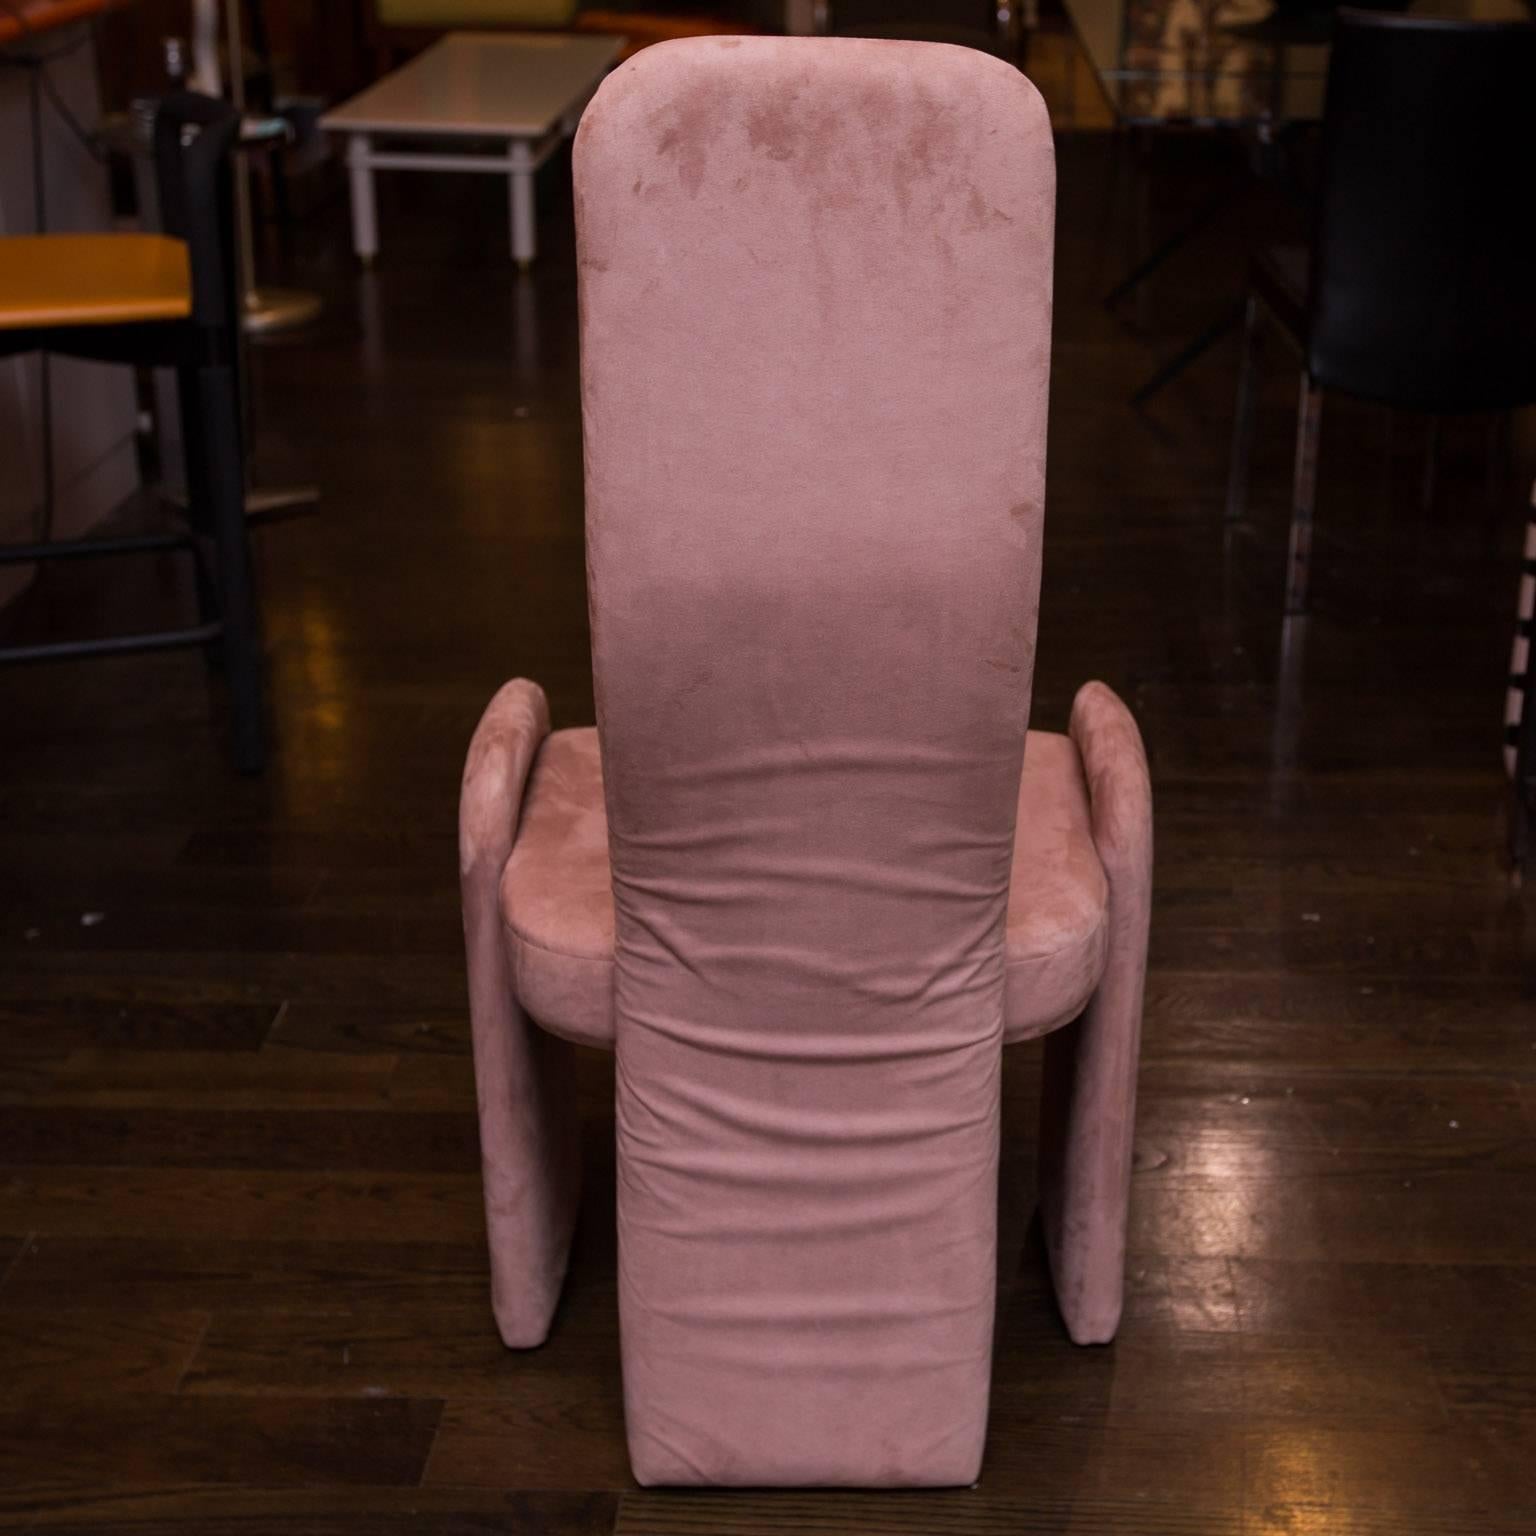 Nice set of iconic 1970s Italian-influence dining chairs in a pinkish ultra suede.